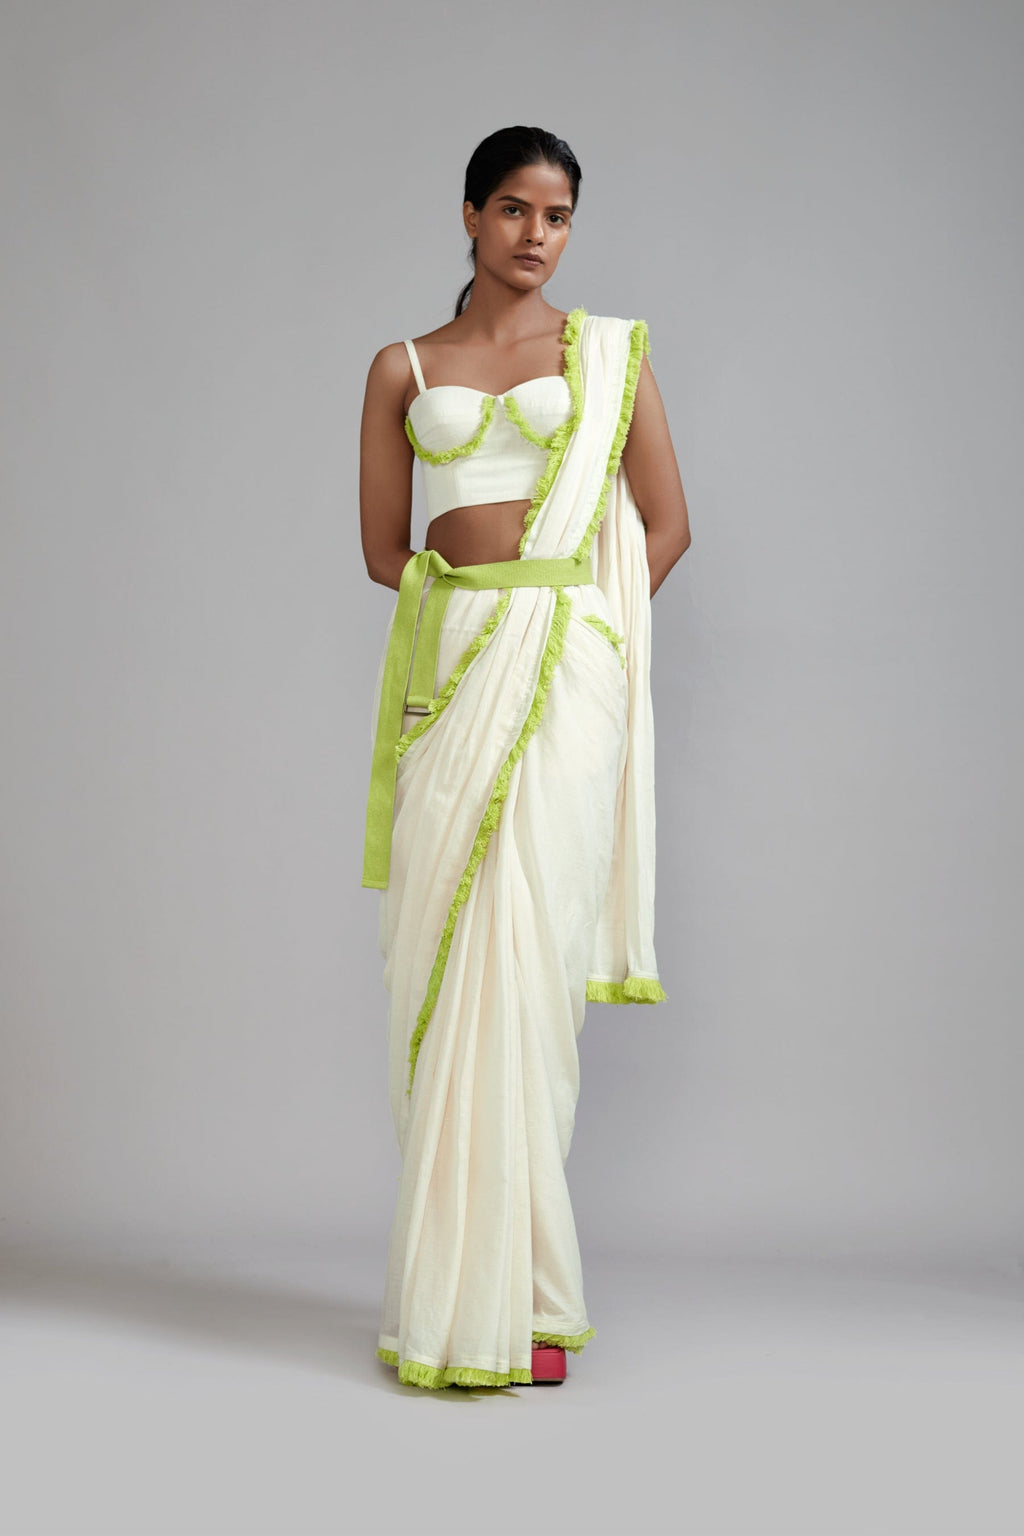 Mati Outfit Sets XS Off-White With Neon Green Saree & Fringed Corset Set (2 PCS)